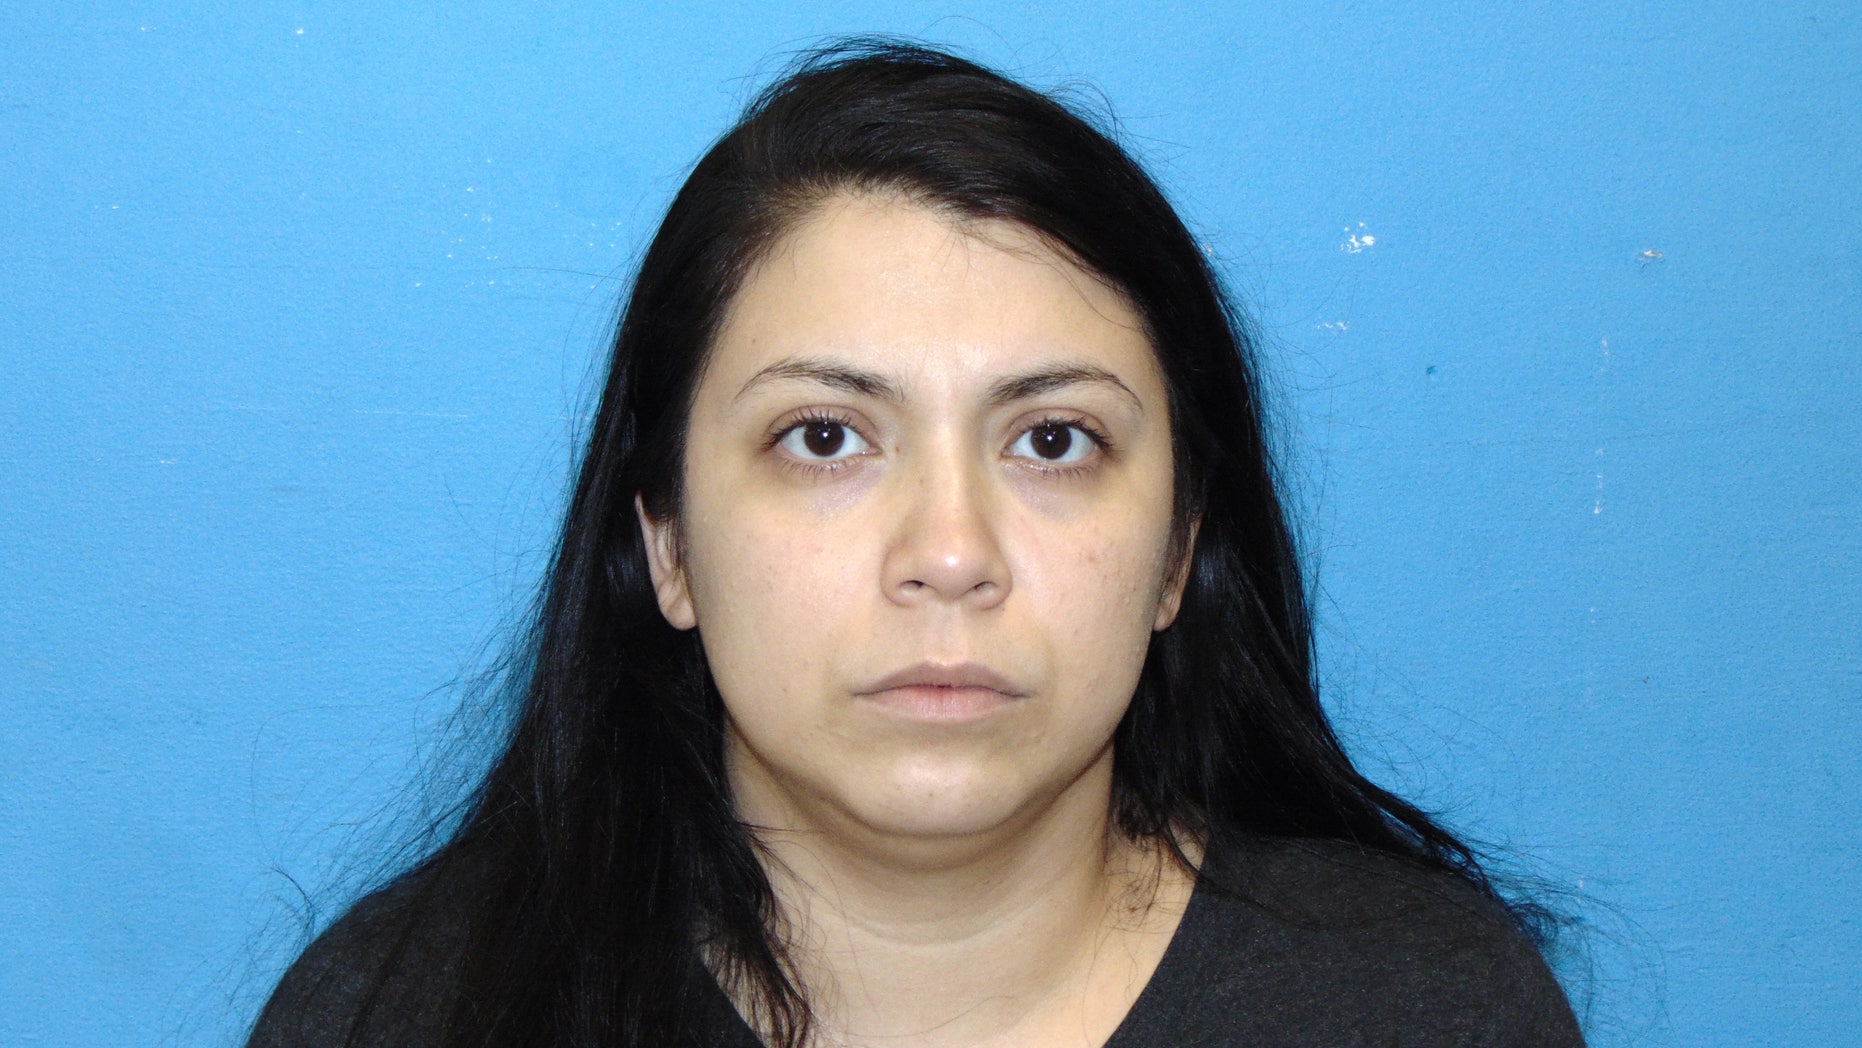 Kimberly Loya was arrested as part of an investigation into drug cartel operations in San Antonio, Texas.